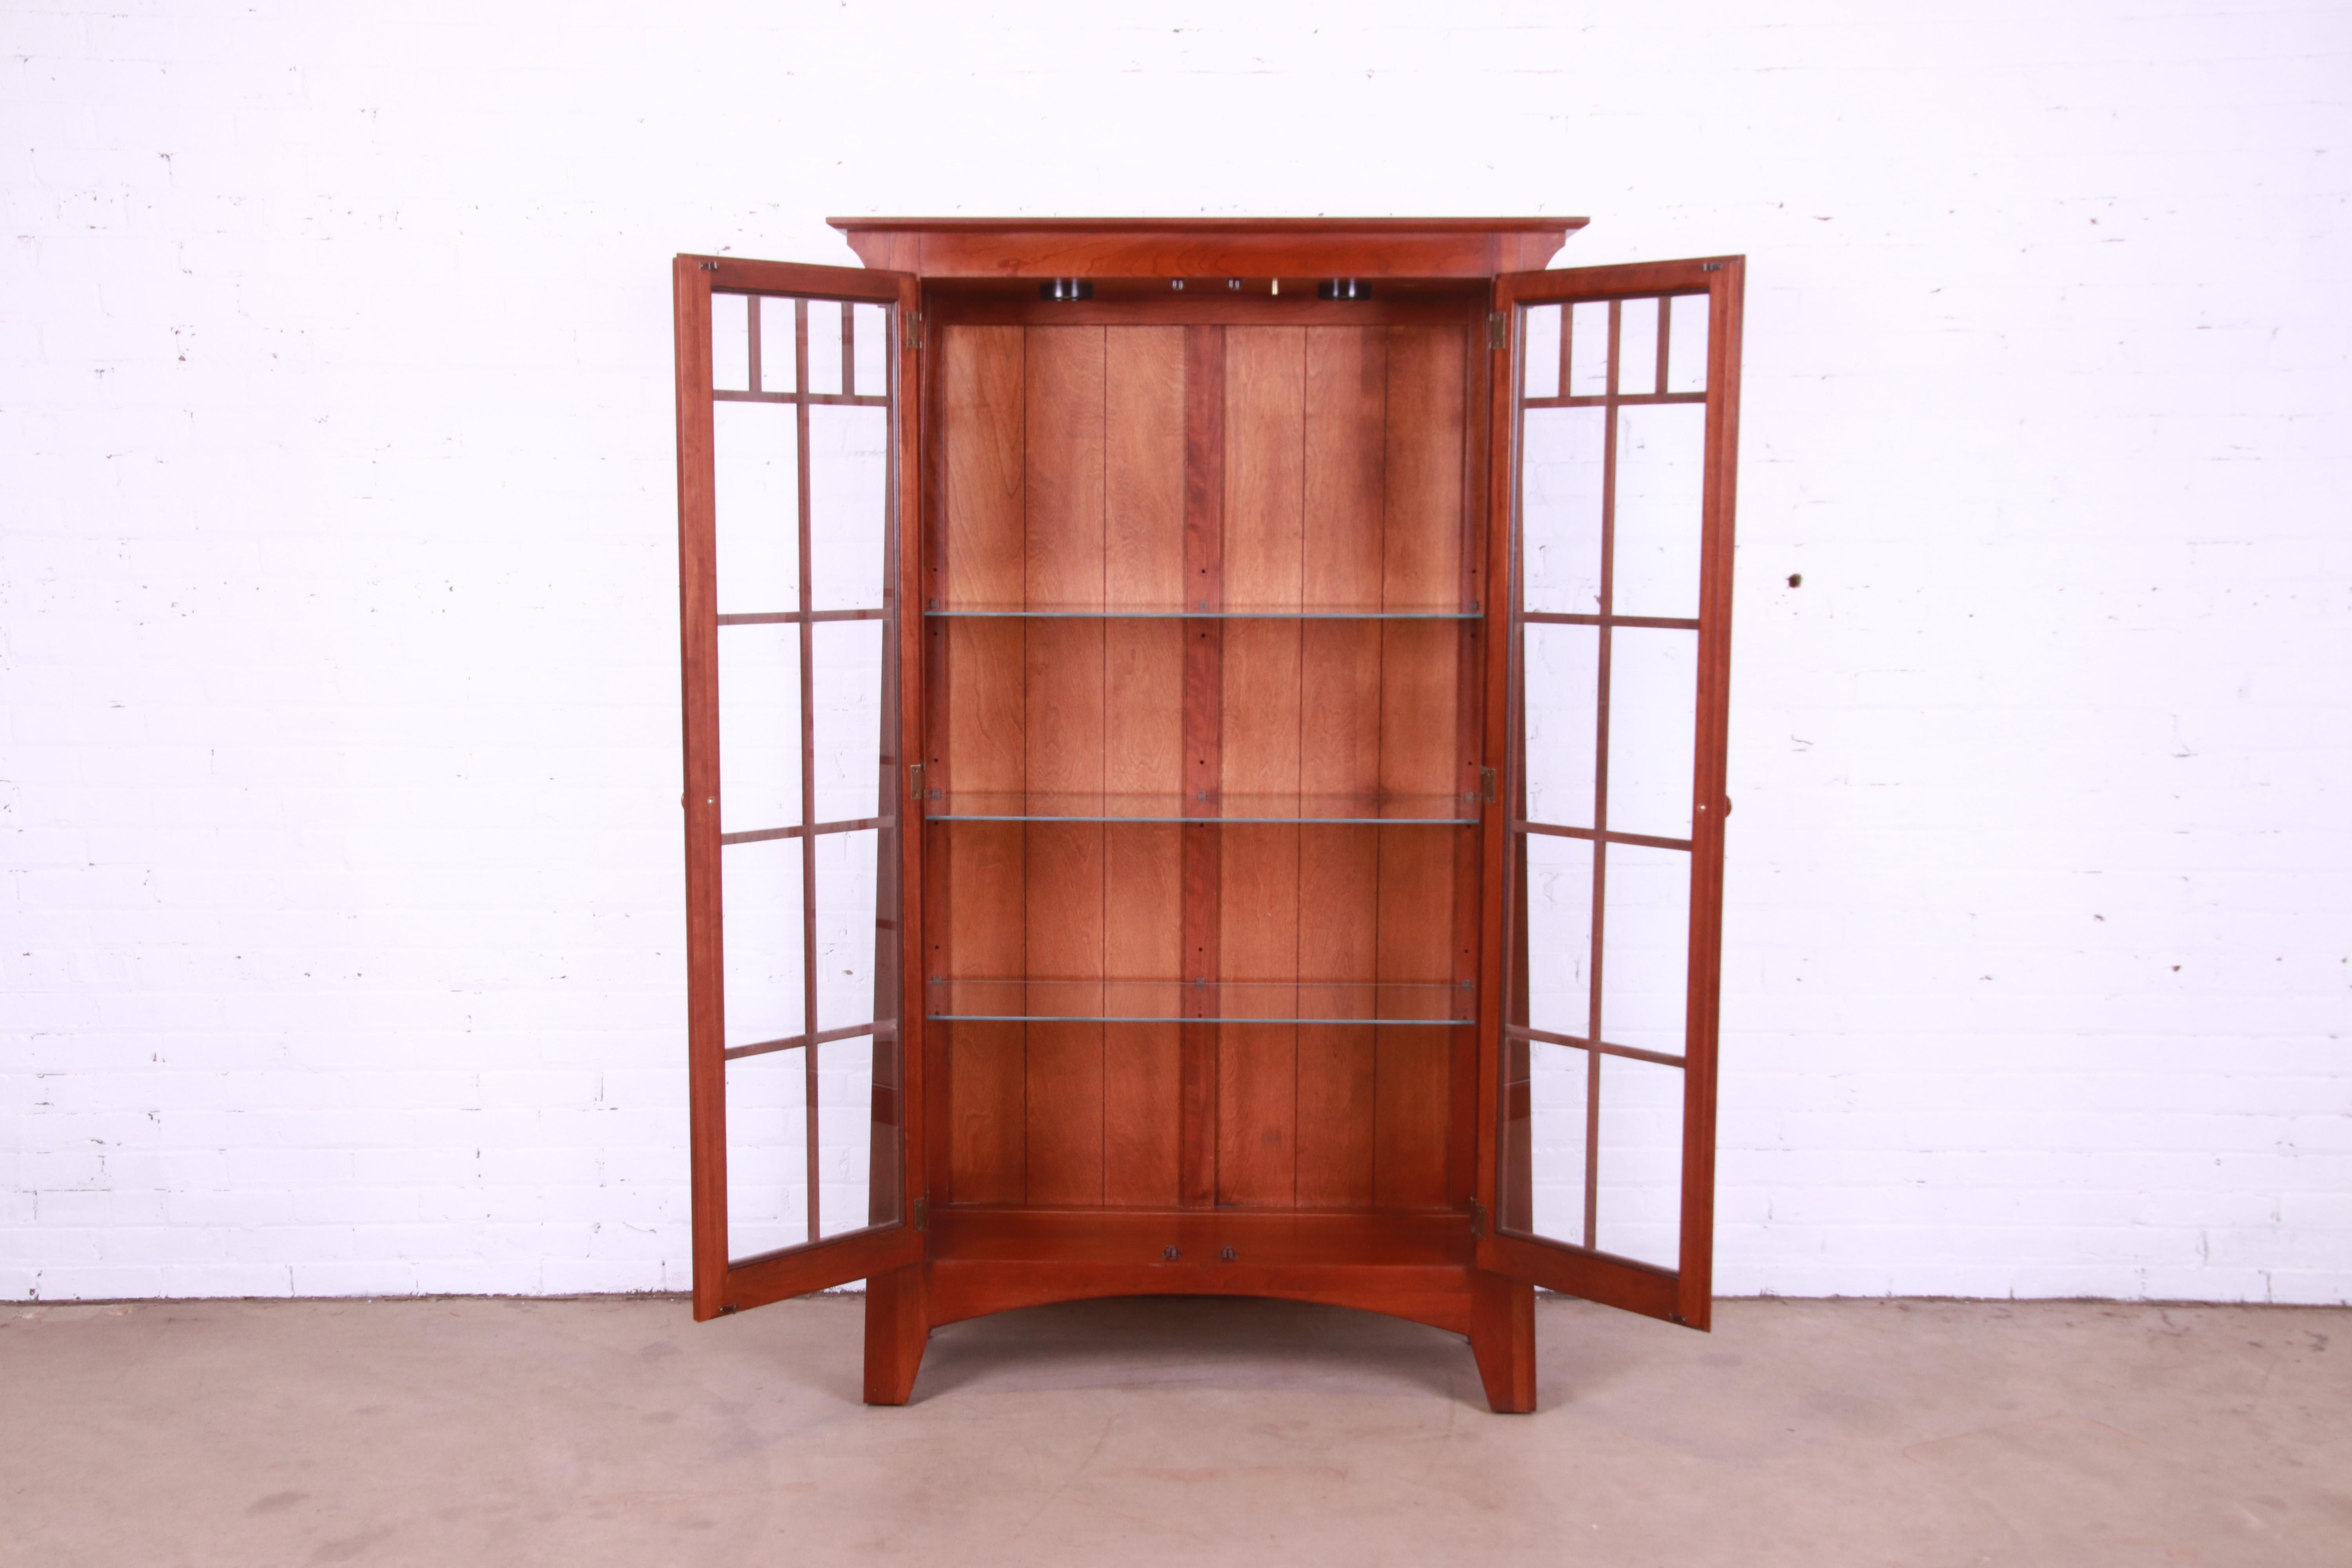 20th Century Ethan Allen Arts & Crafts Solid Cherry Wood Lighted Bookcase or Display Cabinet